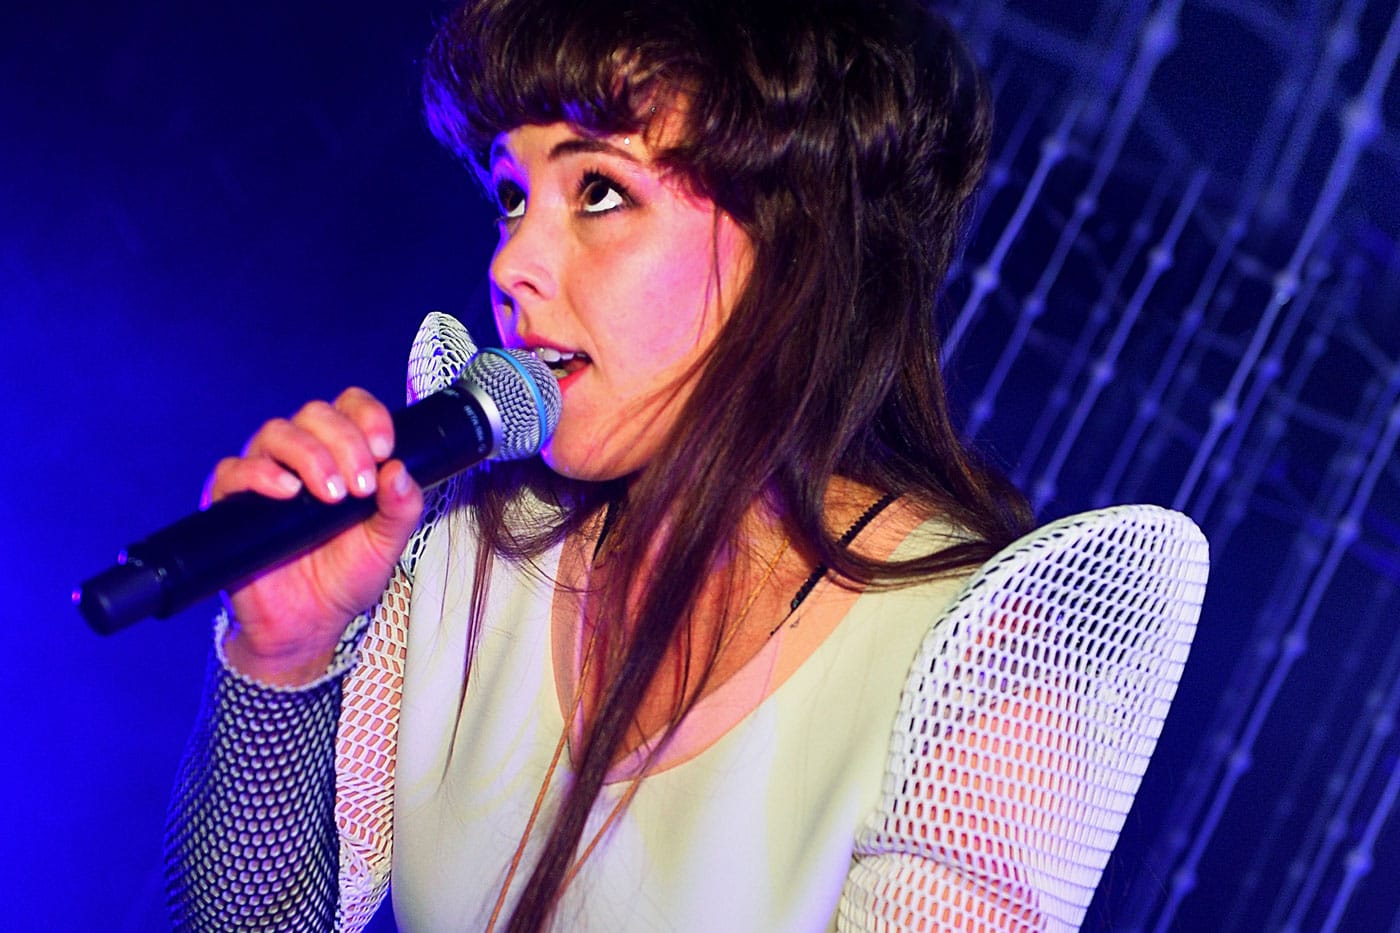 Preview Purity Ring's New Song “Asido”